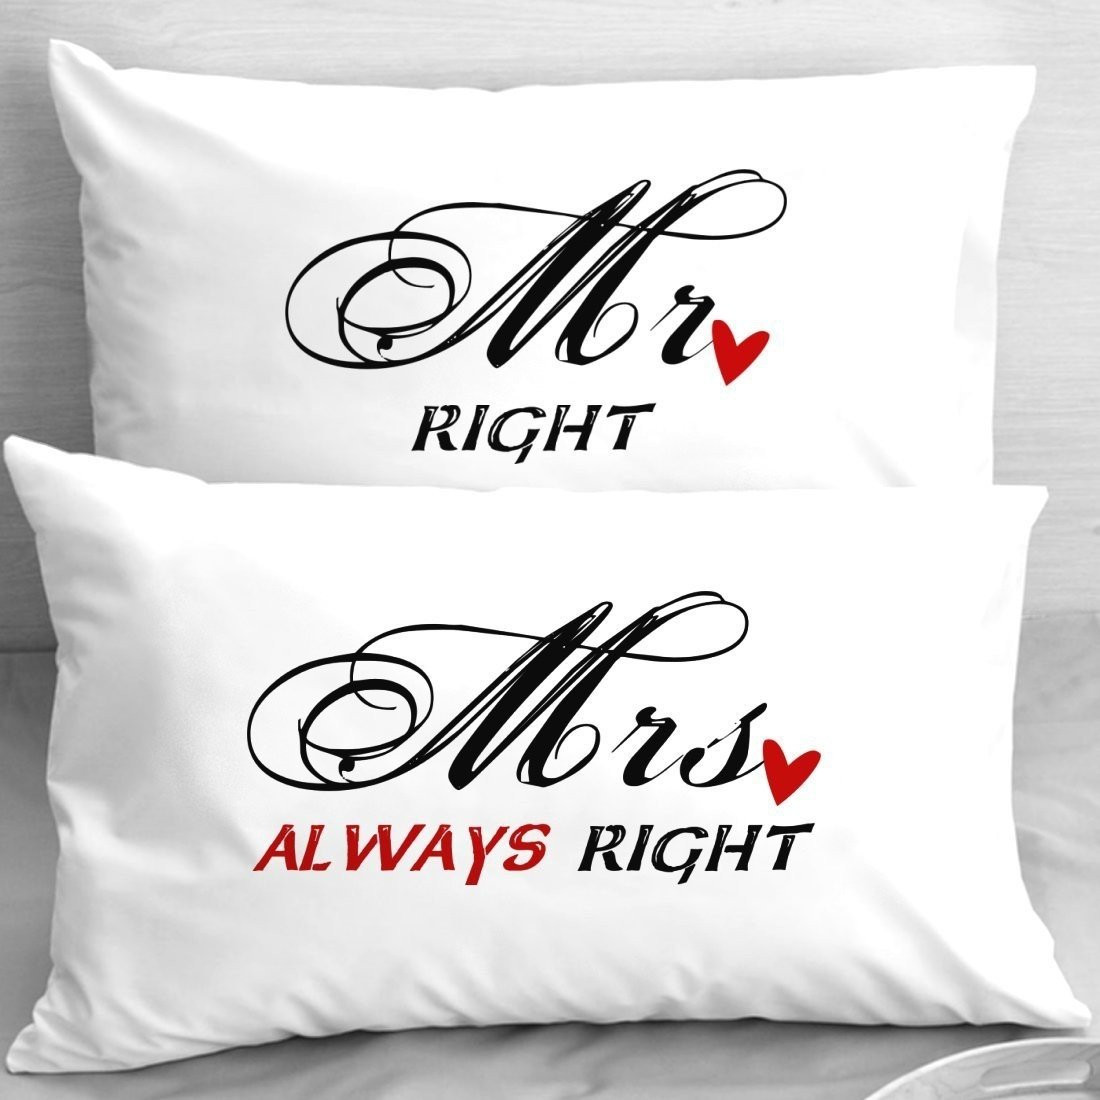 25Th Anniversary Gift Ideas For Couples
 10 Stunning 25Th Wedding Anniversary Gift Ideas For